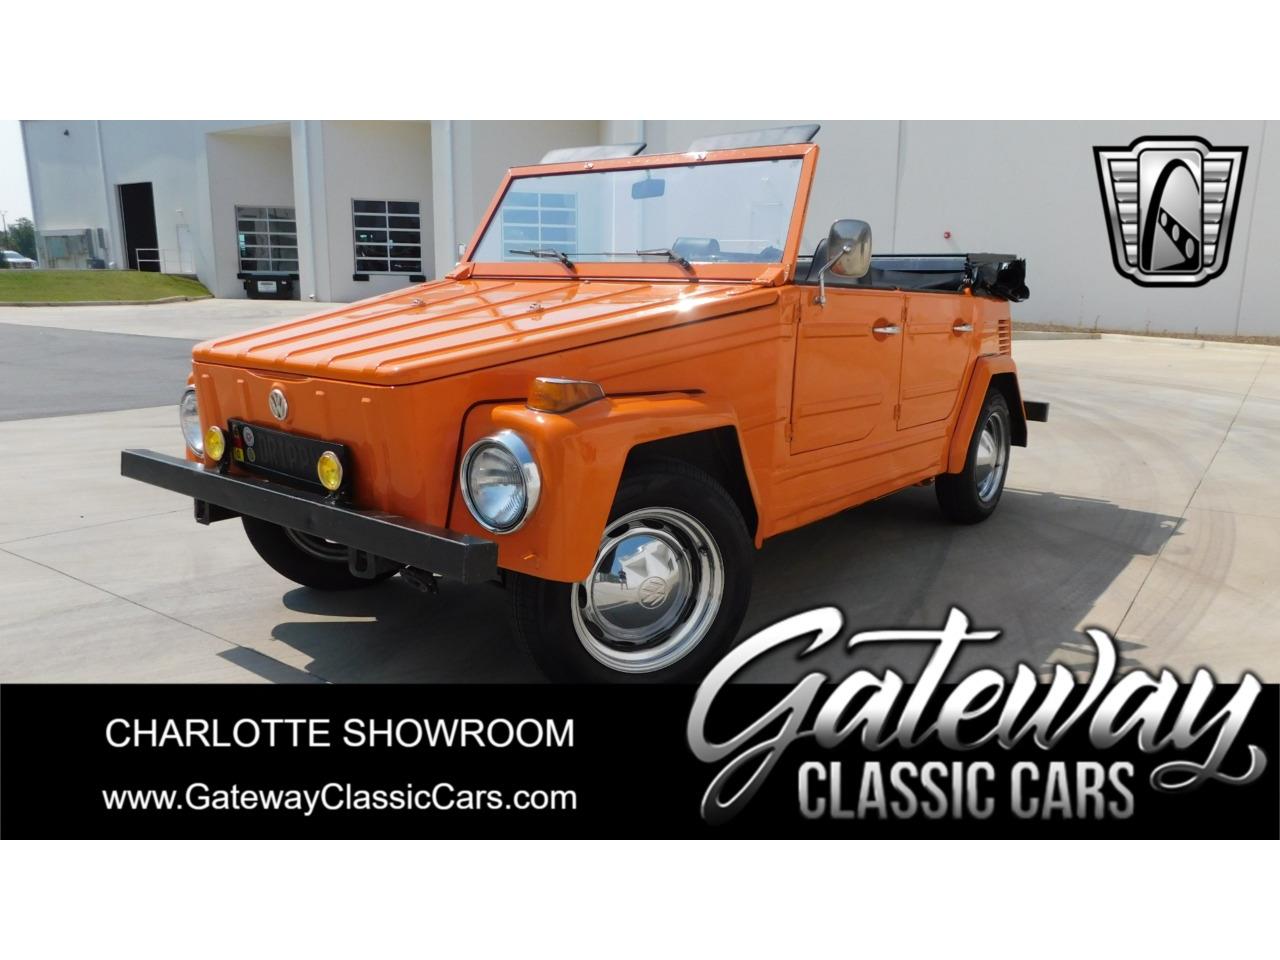 For Sale: 1973 Volkswagen Thing in O'Fallon, Illinois for sale in O Fallon, IL